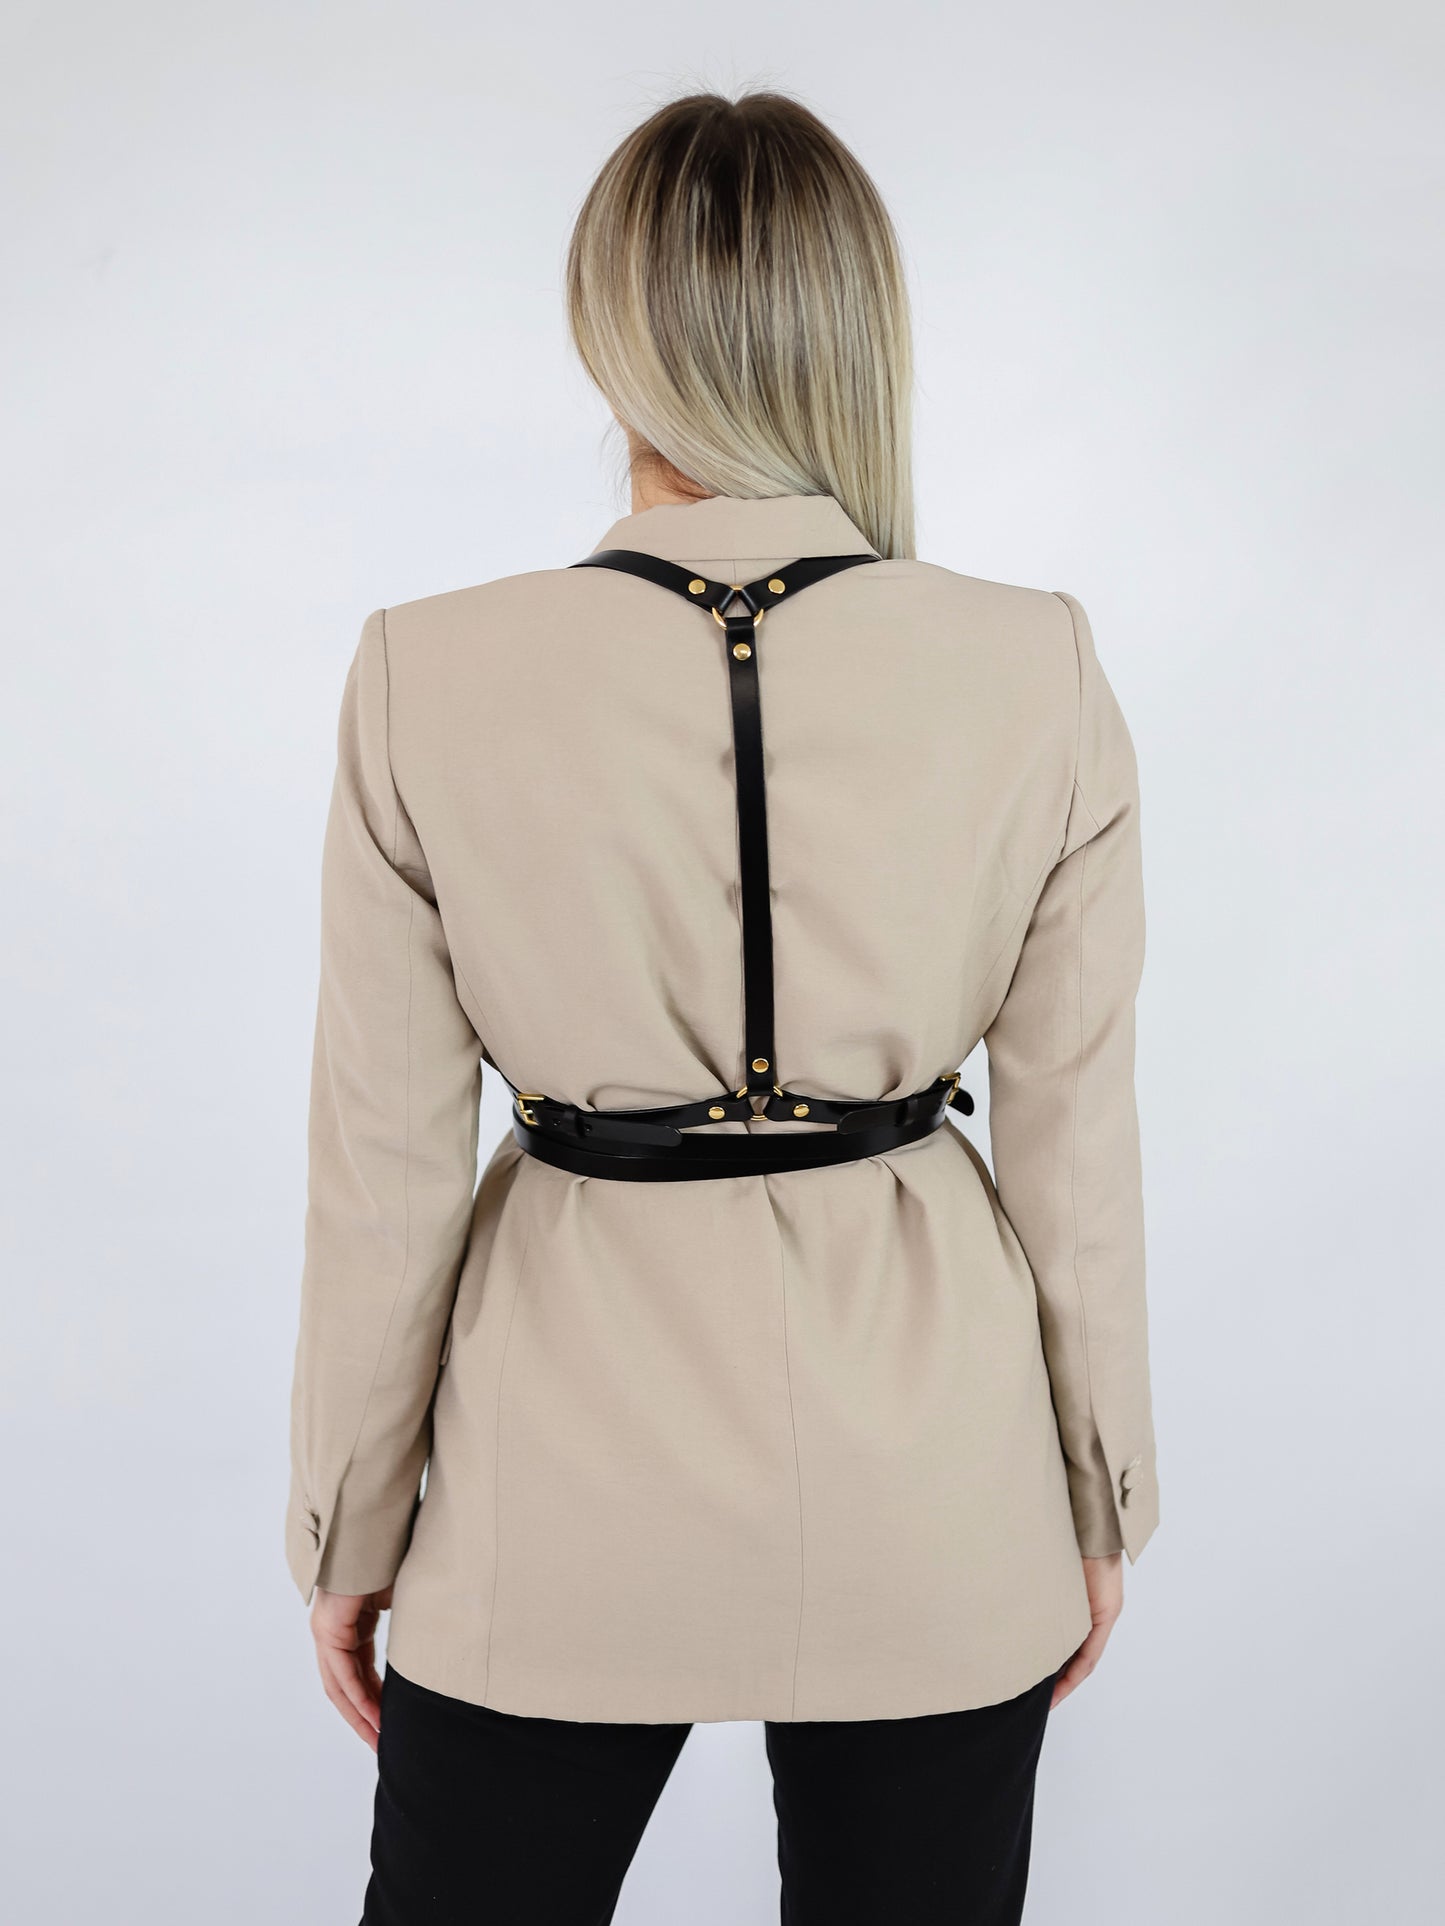 Back view of black leather harness.